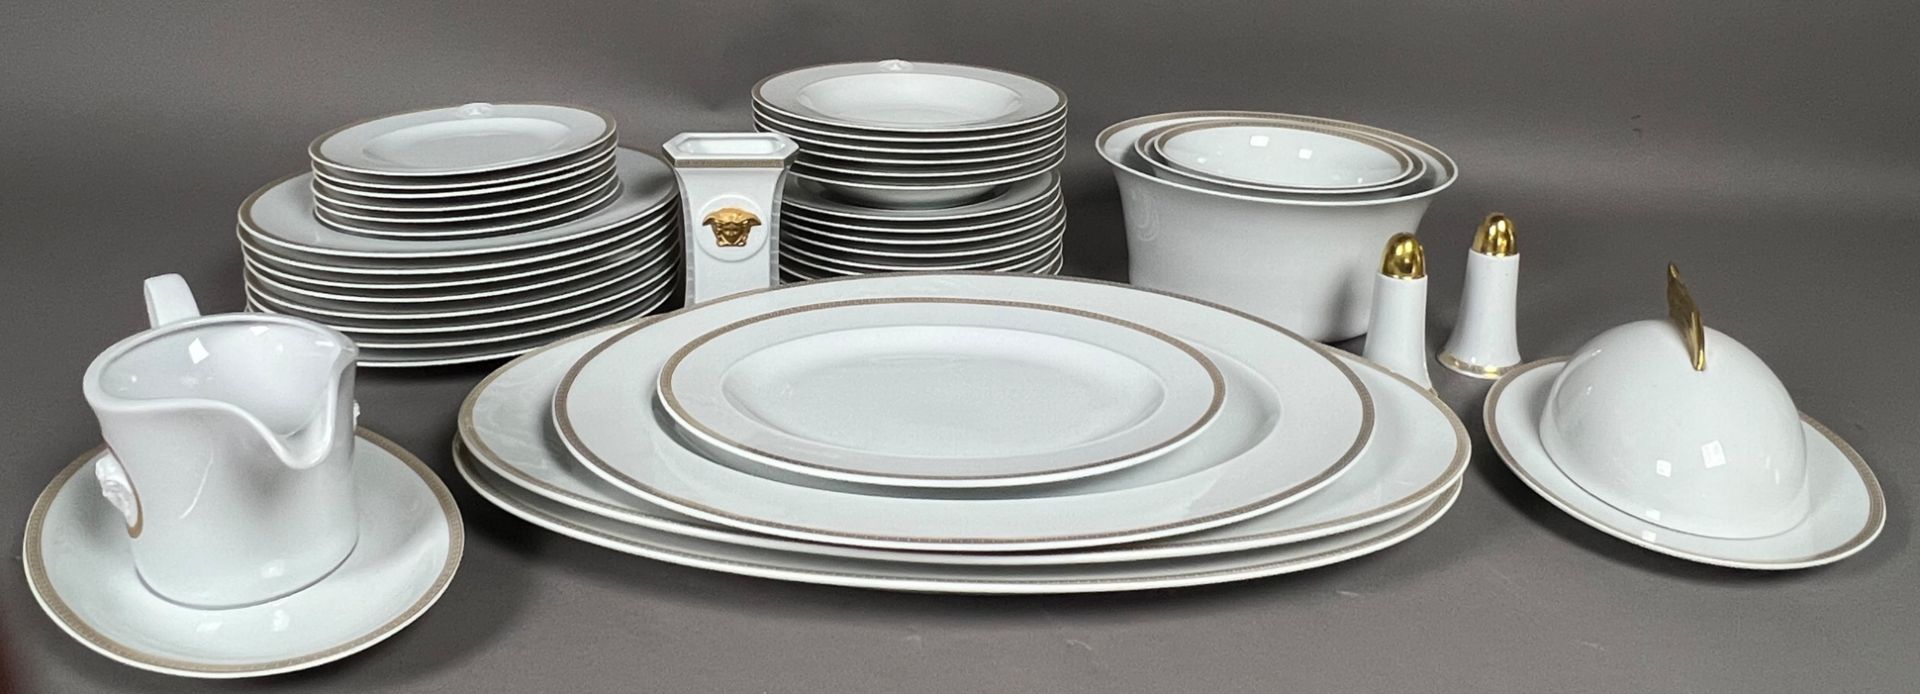 VERSACE by ROSENTHAL. 41-piece dinner service. Icarus. "Medallion Meandre D'Or". - Image 2 of 10